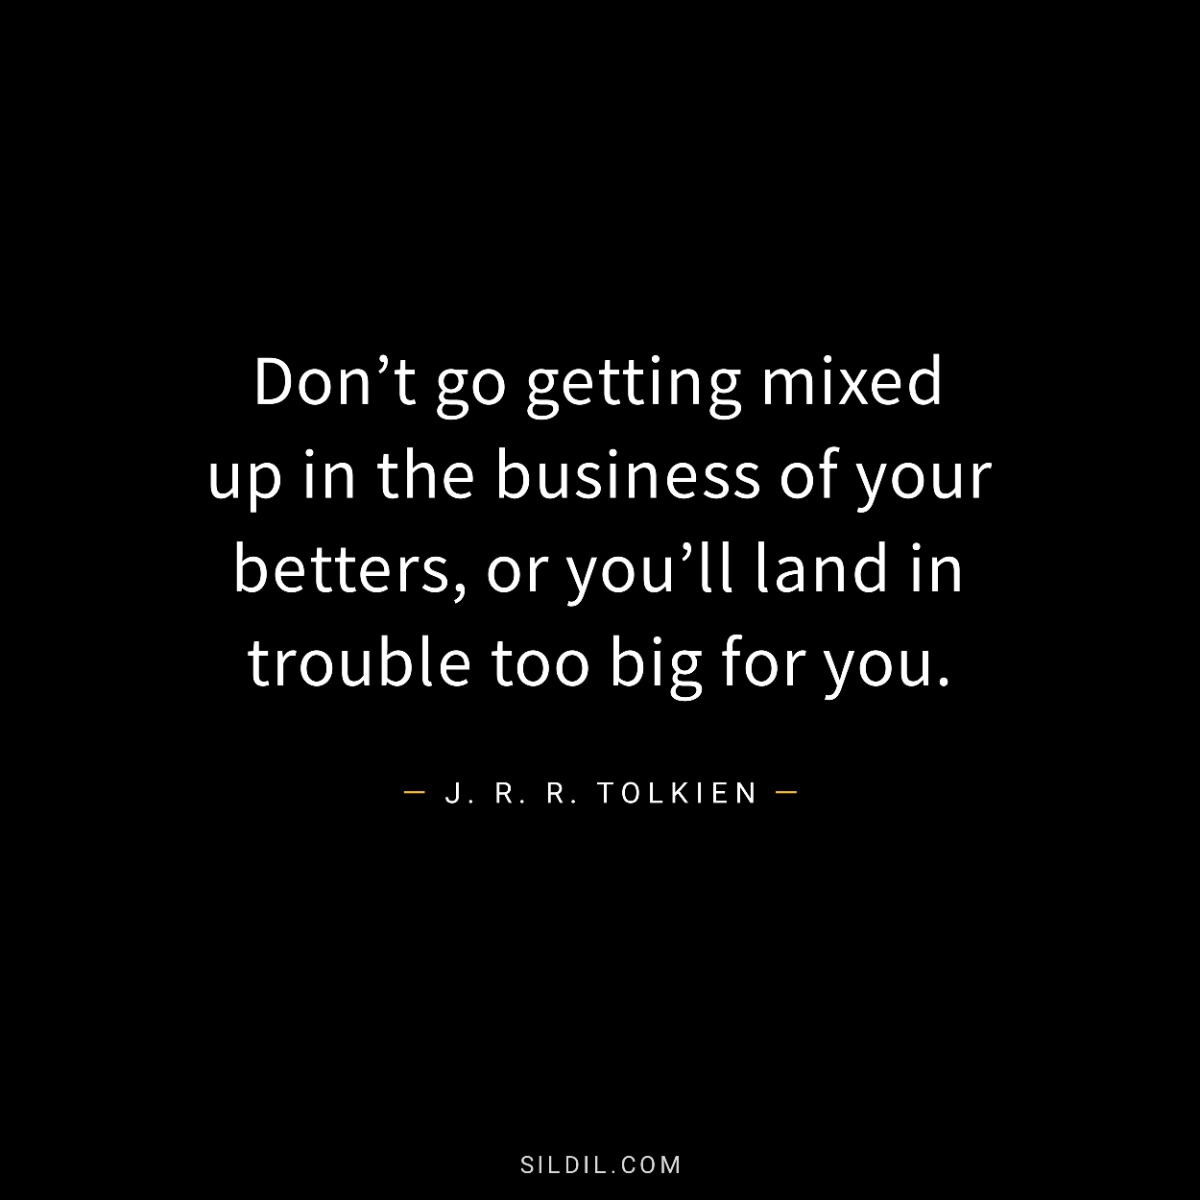 Don’t go getting mixed up in the business of your betters, or you’ll land in trouble too big for you.